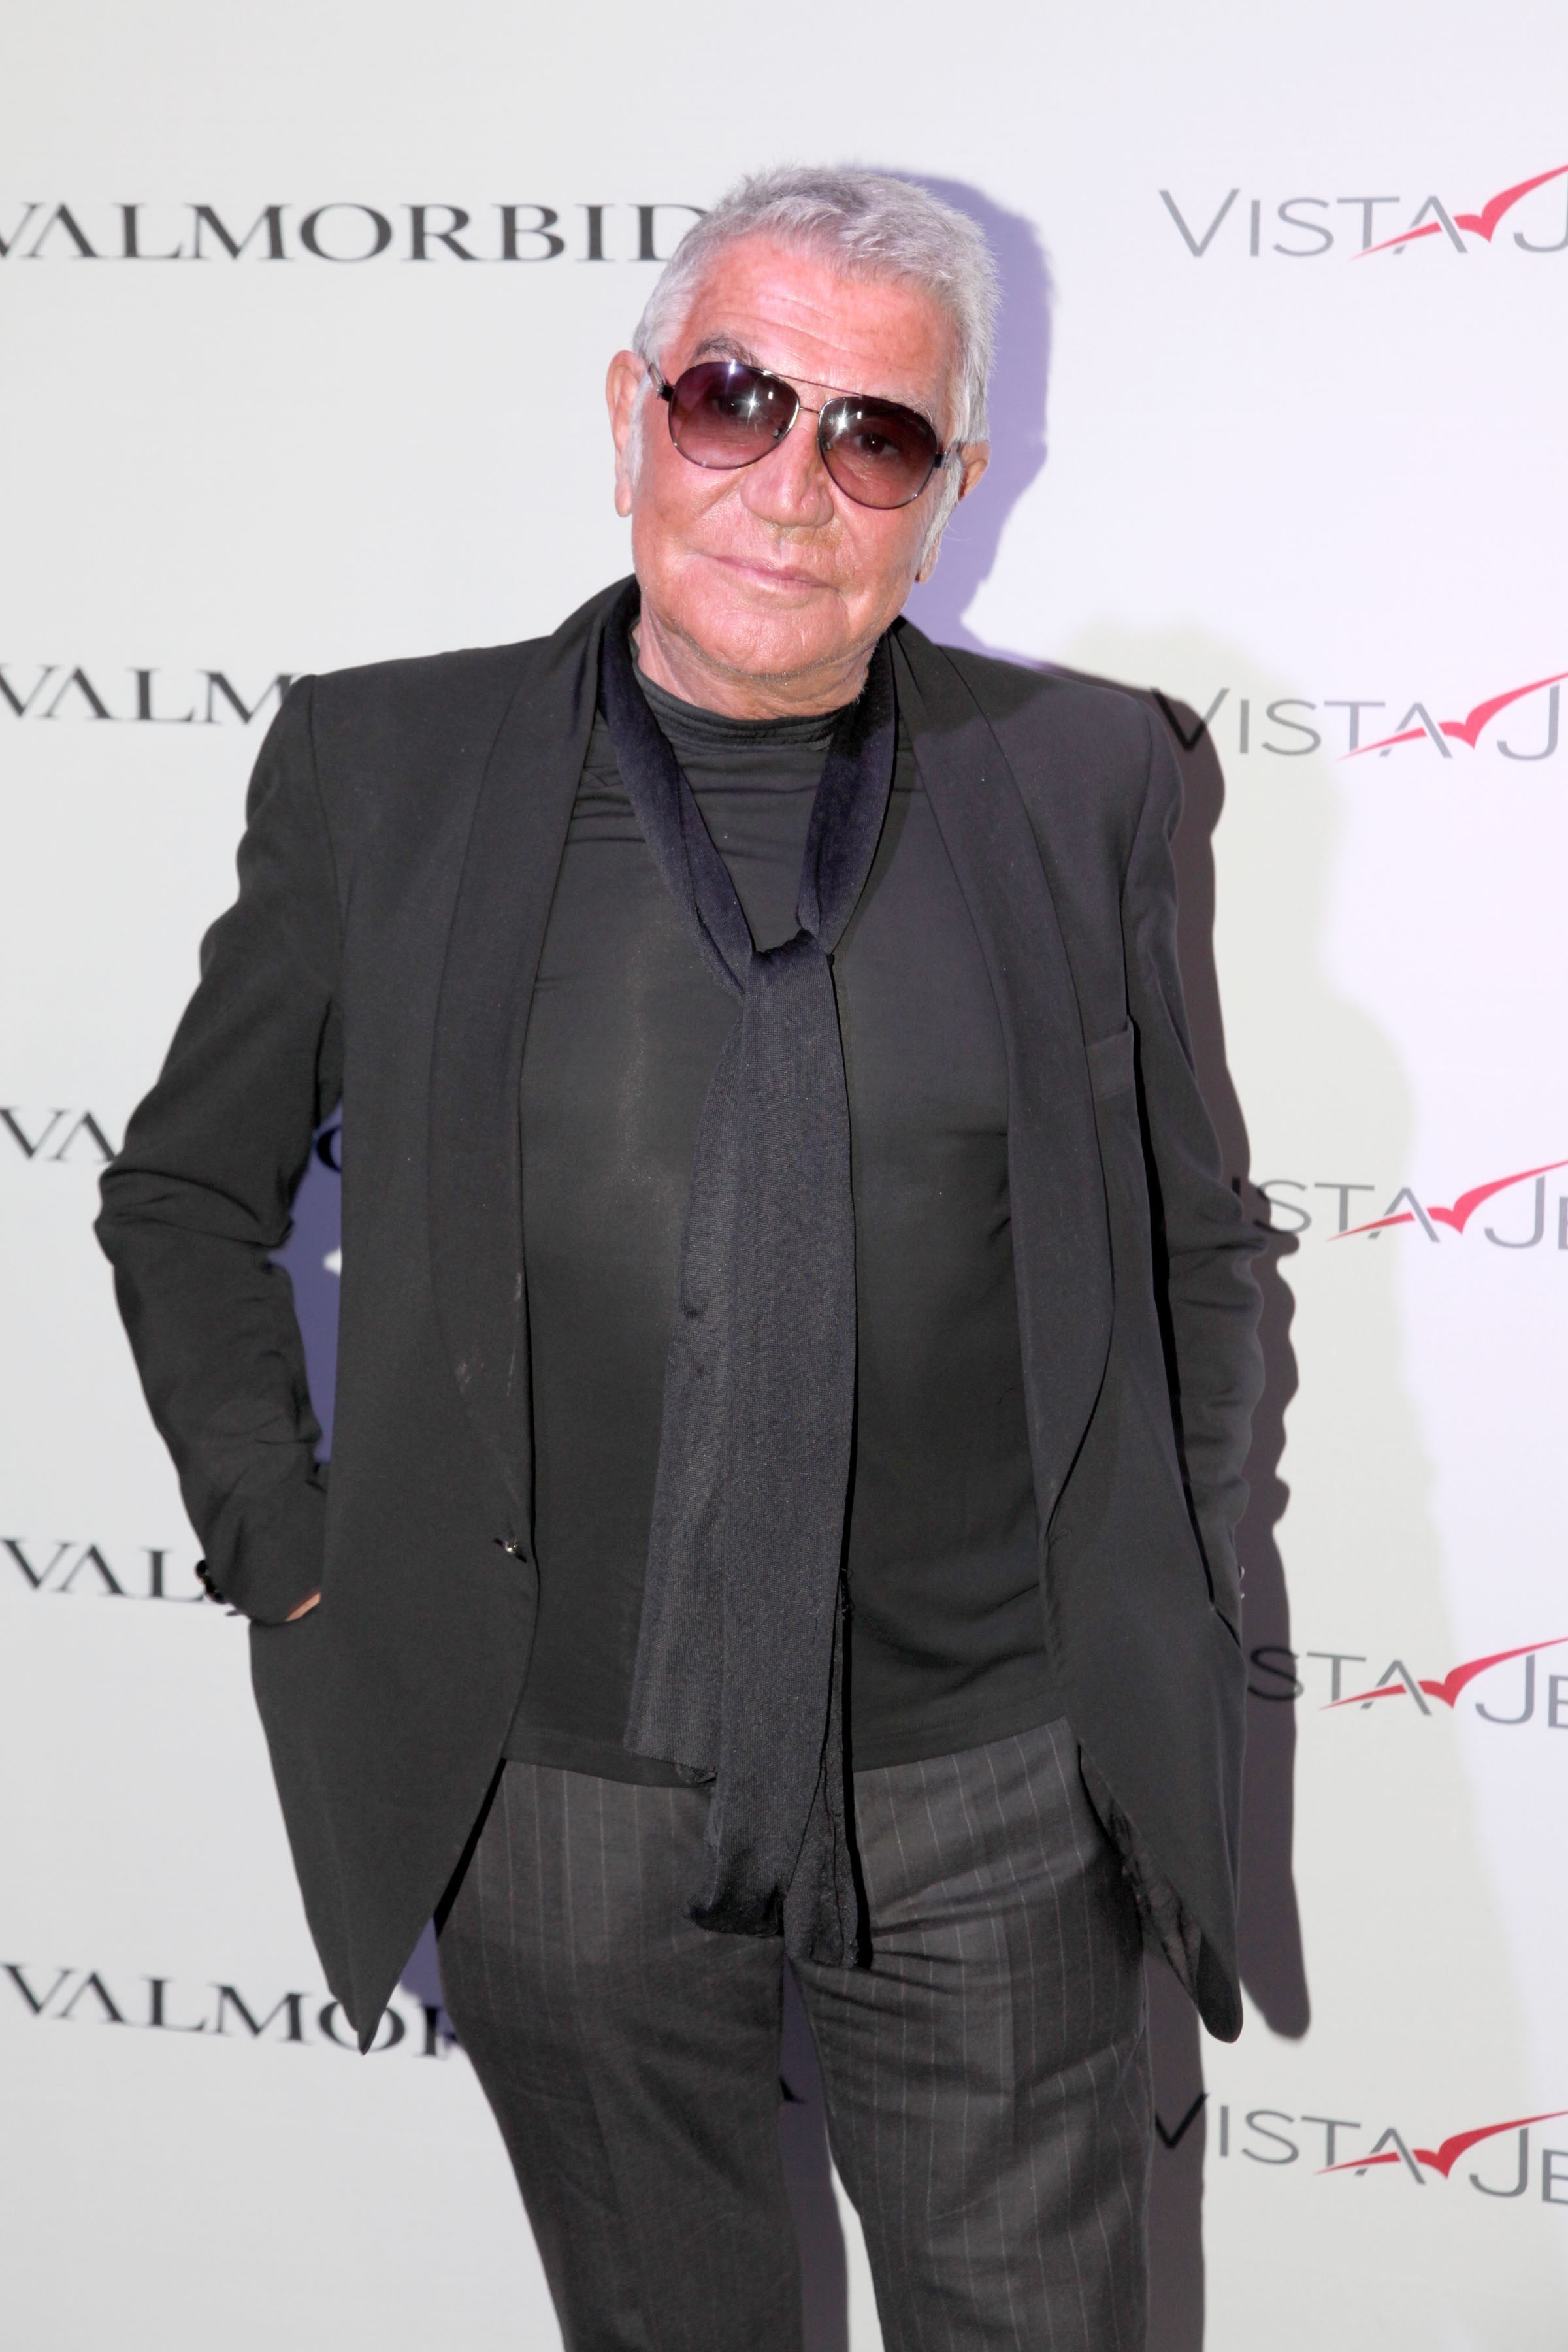 Roberto Cavalli Plans To Sell Off A Majority Stake Of His Brand By Next  Month